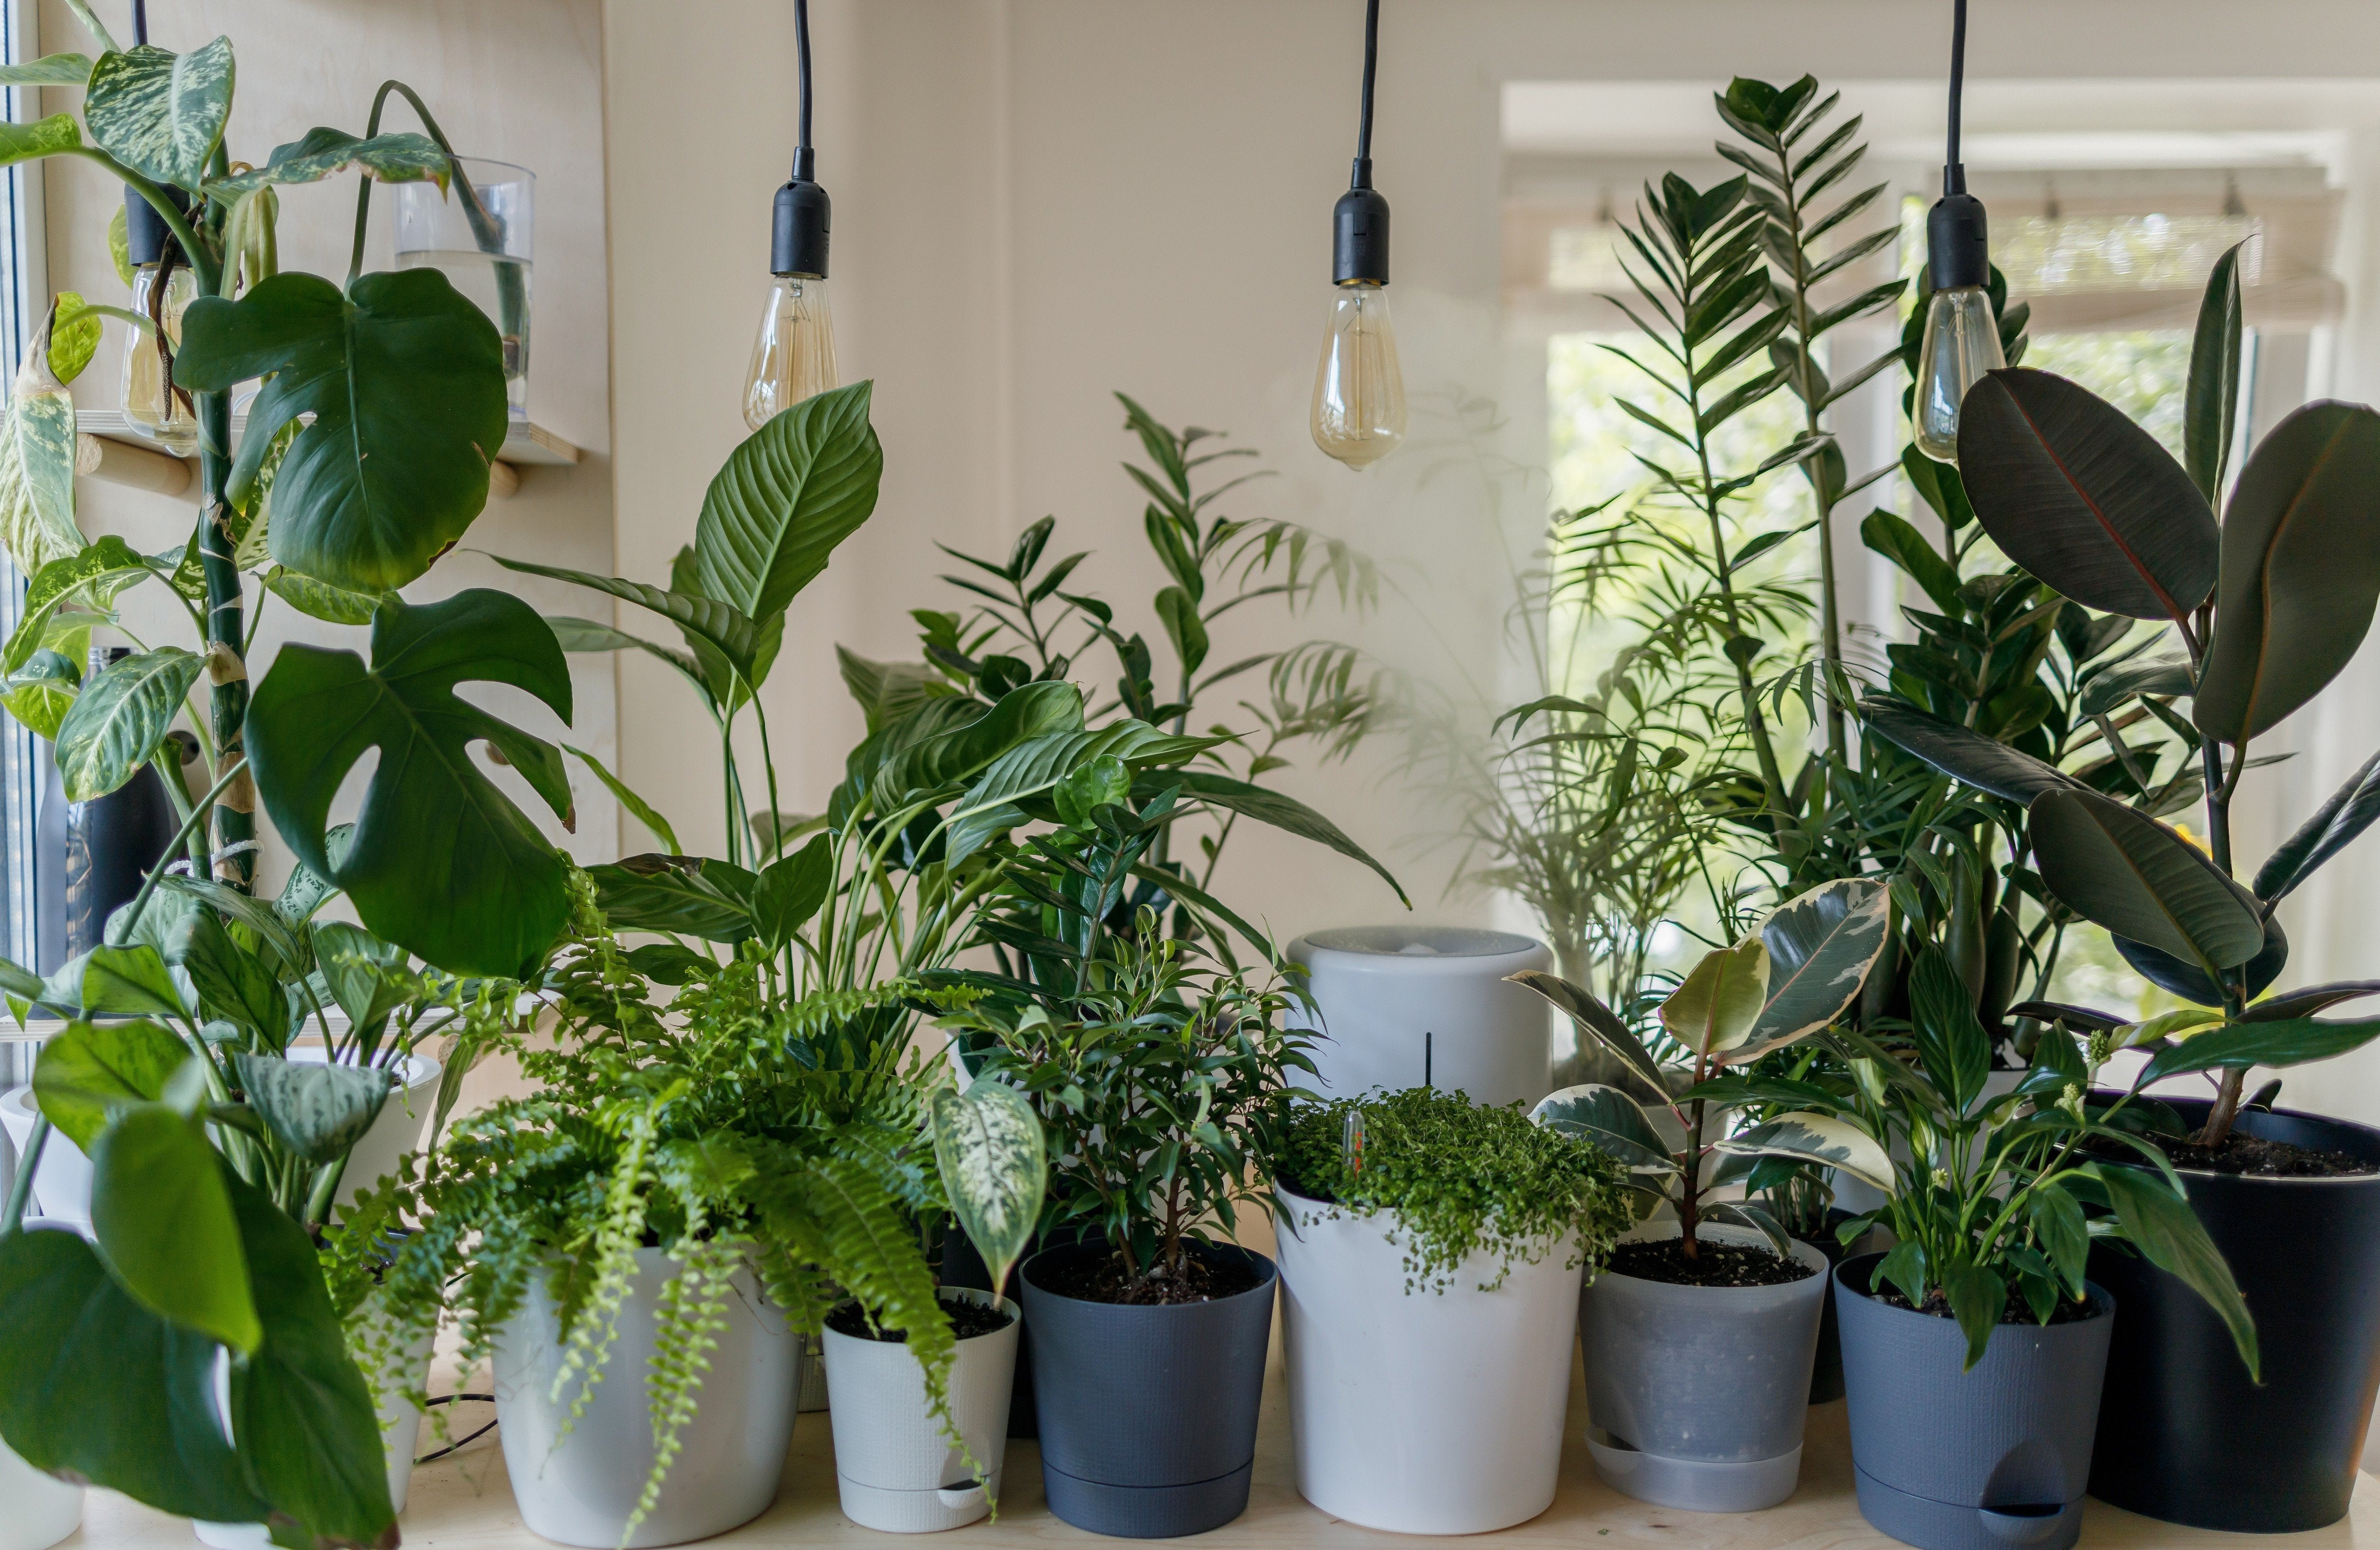 How to increase humidity for houseplants (without a humidifier